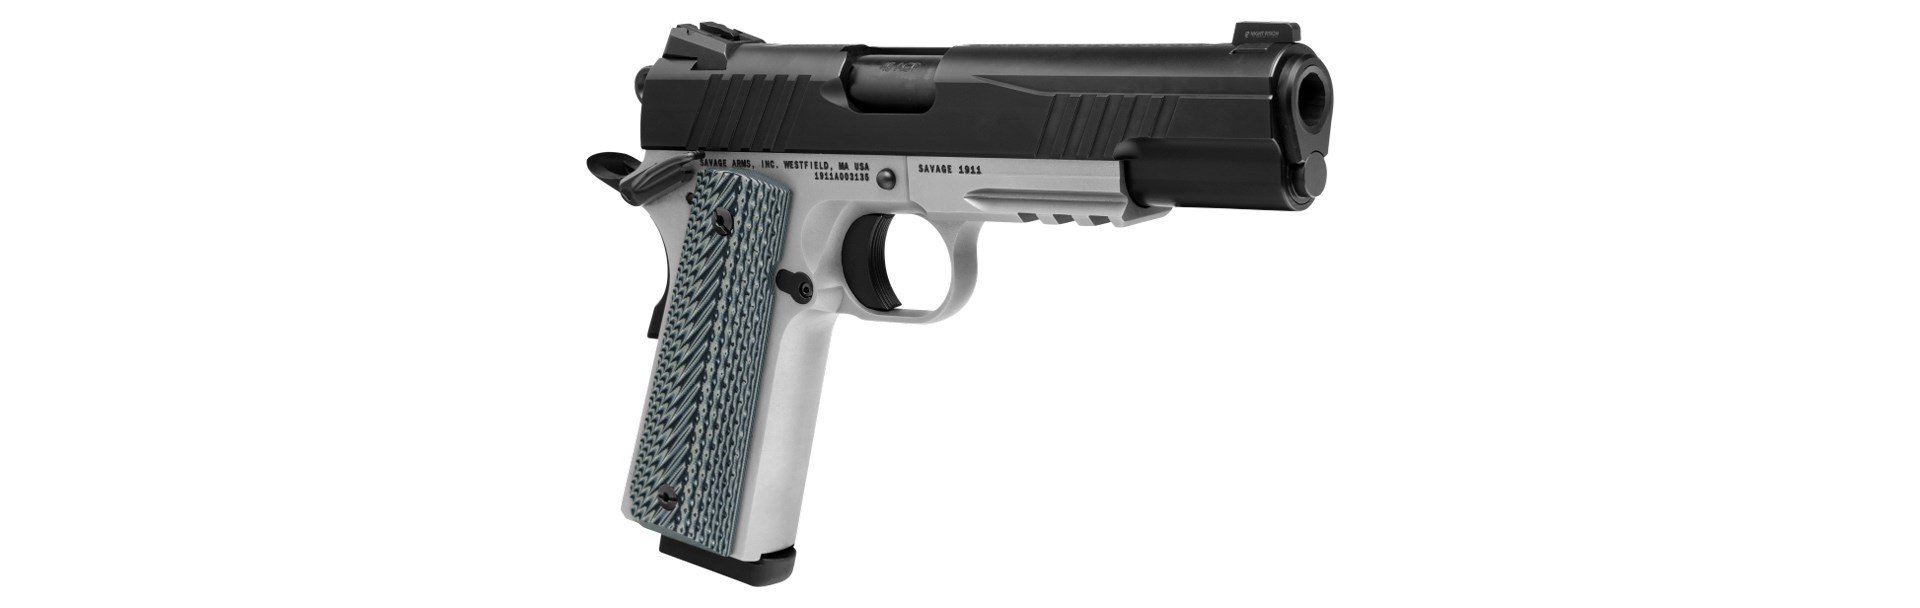 quartering view of savage arms 1911 pistol .45 acp handgun two-tone silver and black nitride g10 grips zig-zag